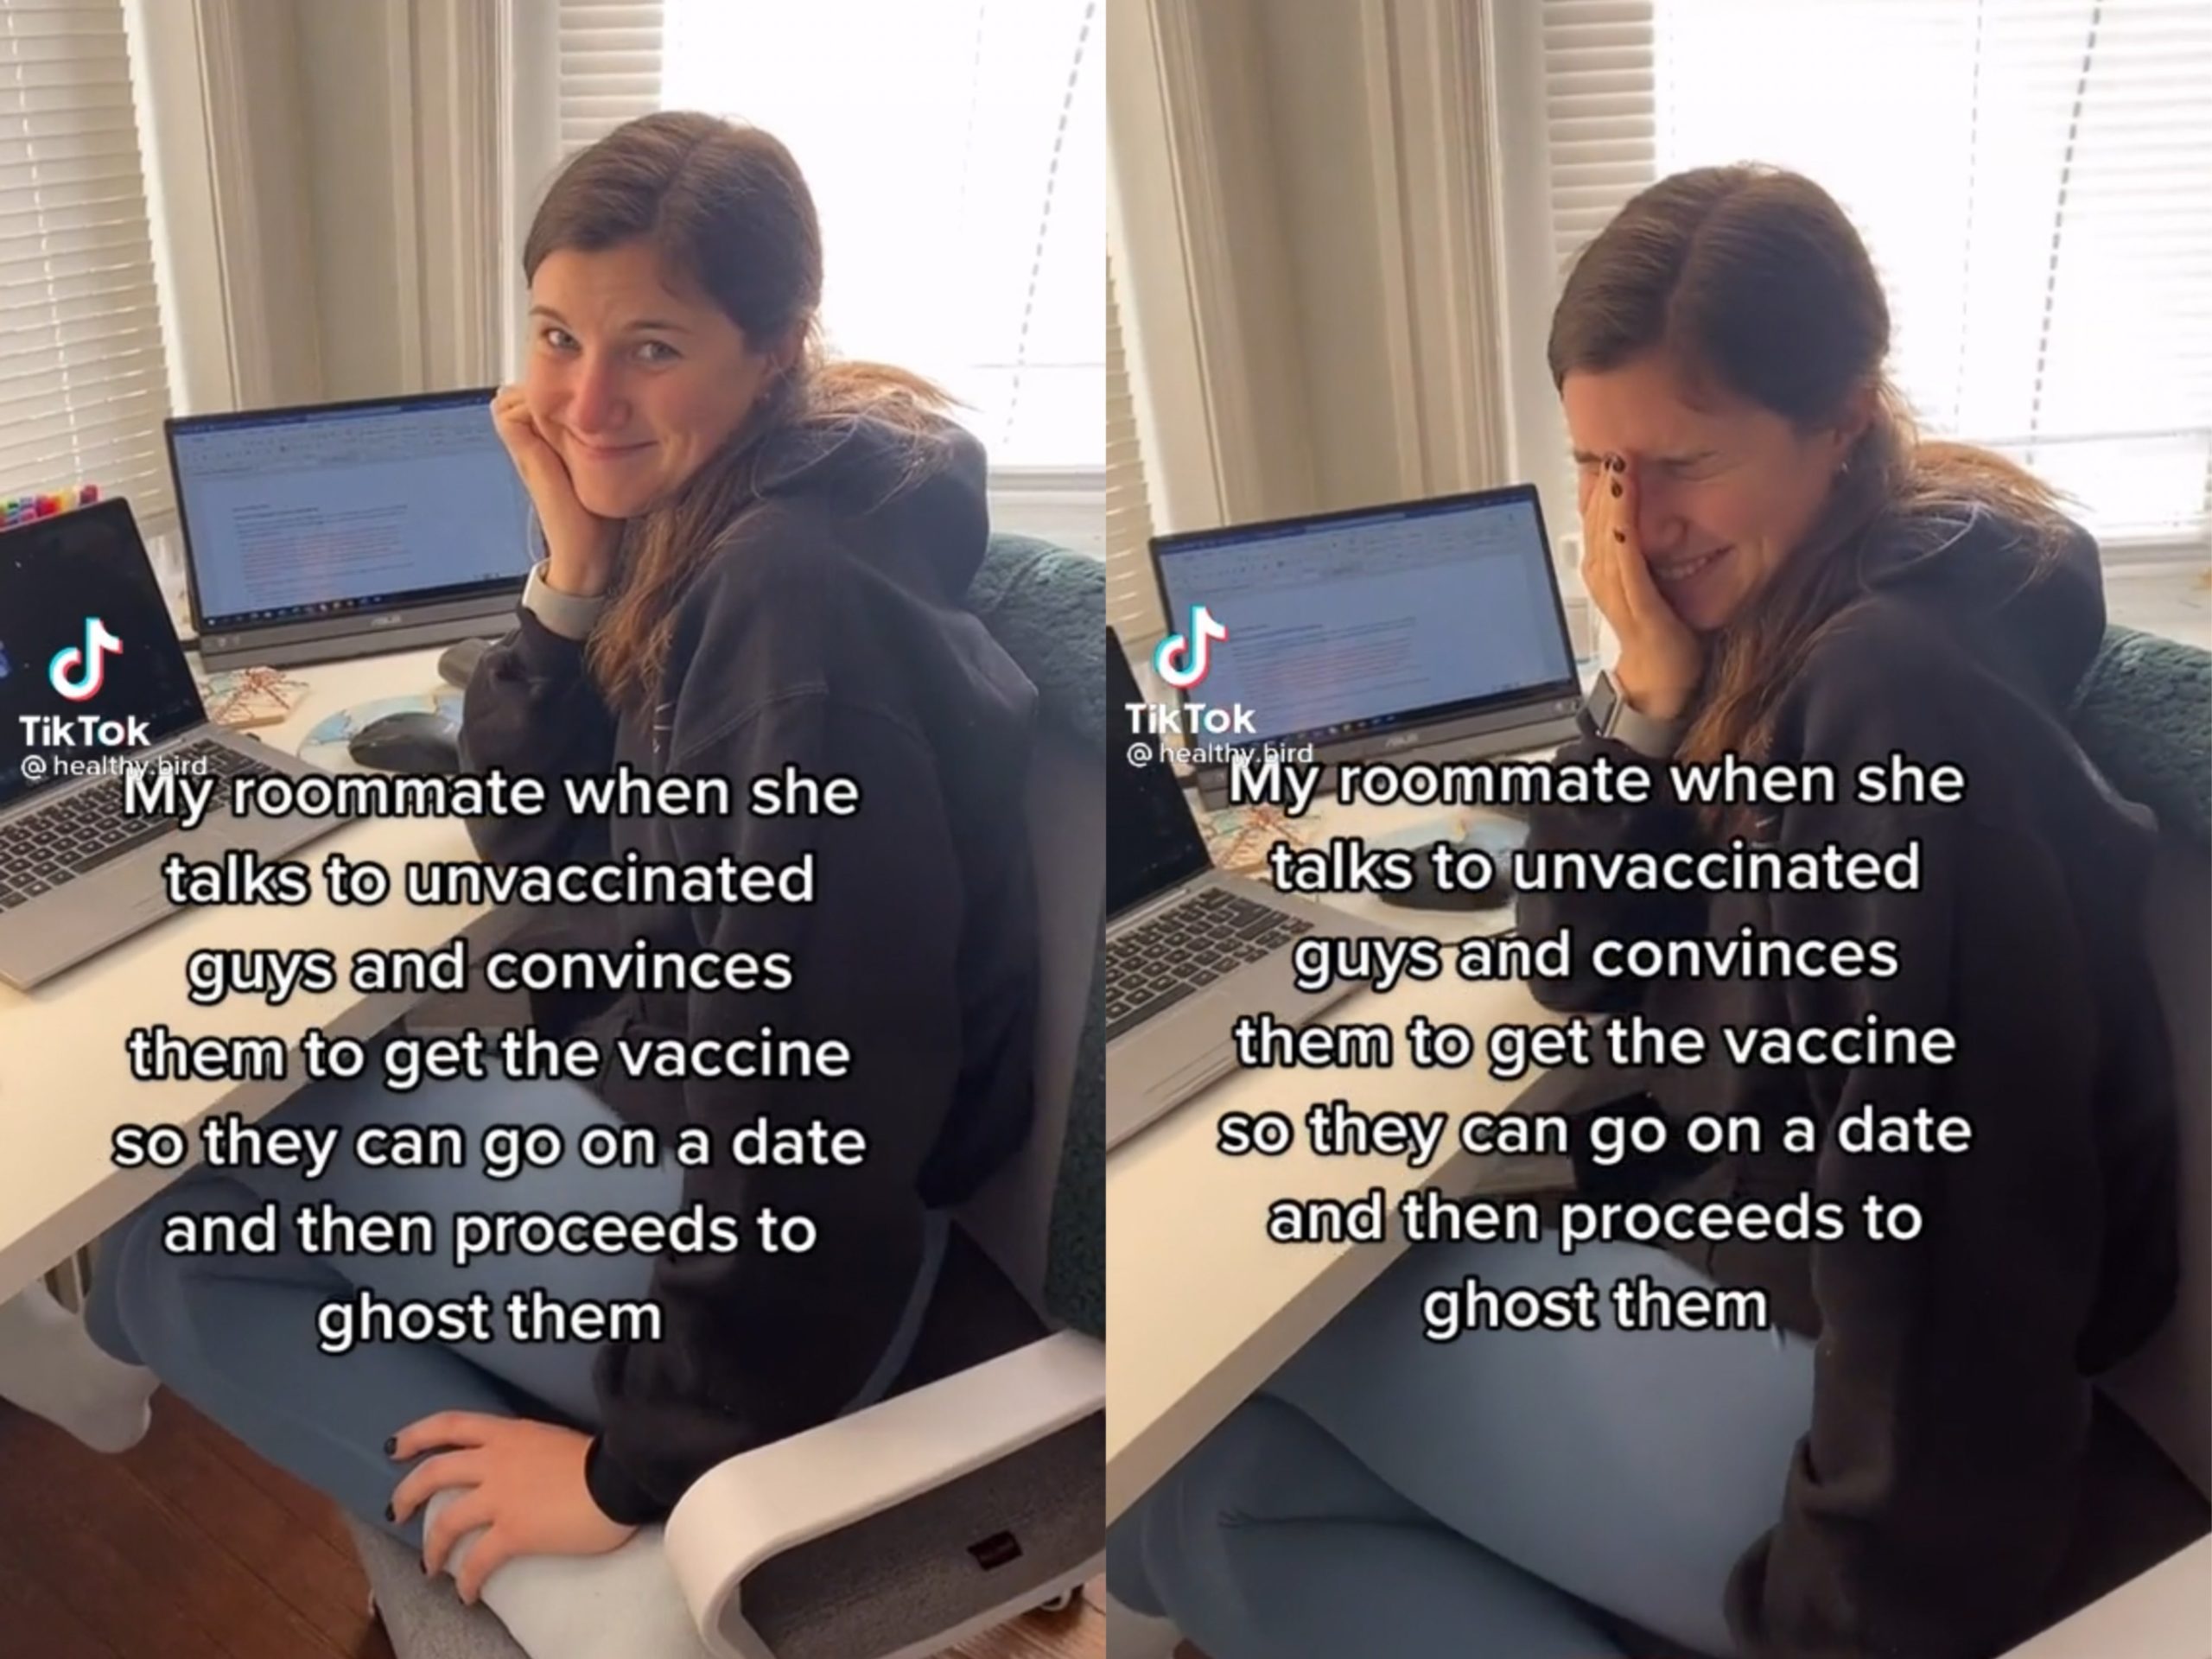 Female convinces men to get vaccinated in exchange for a date. Then they are gone.